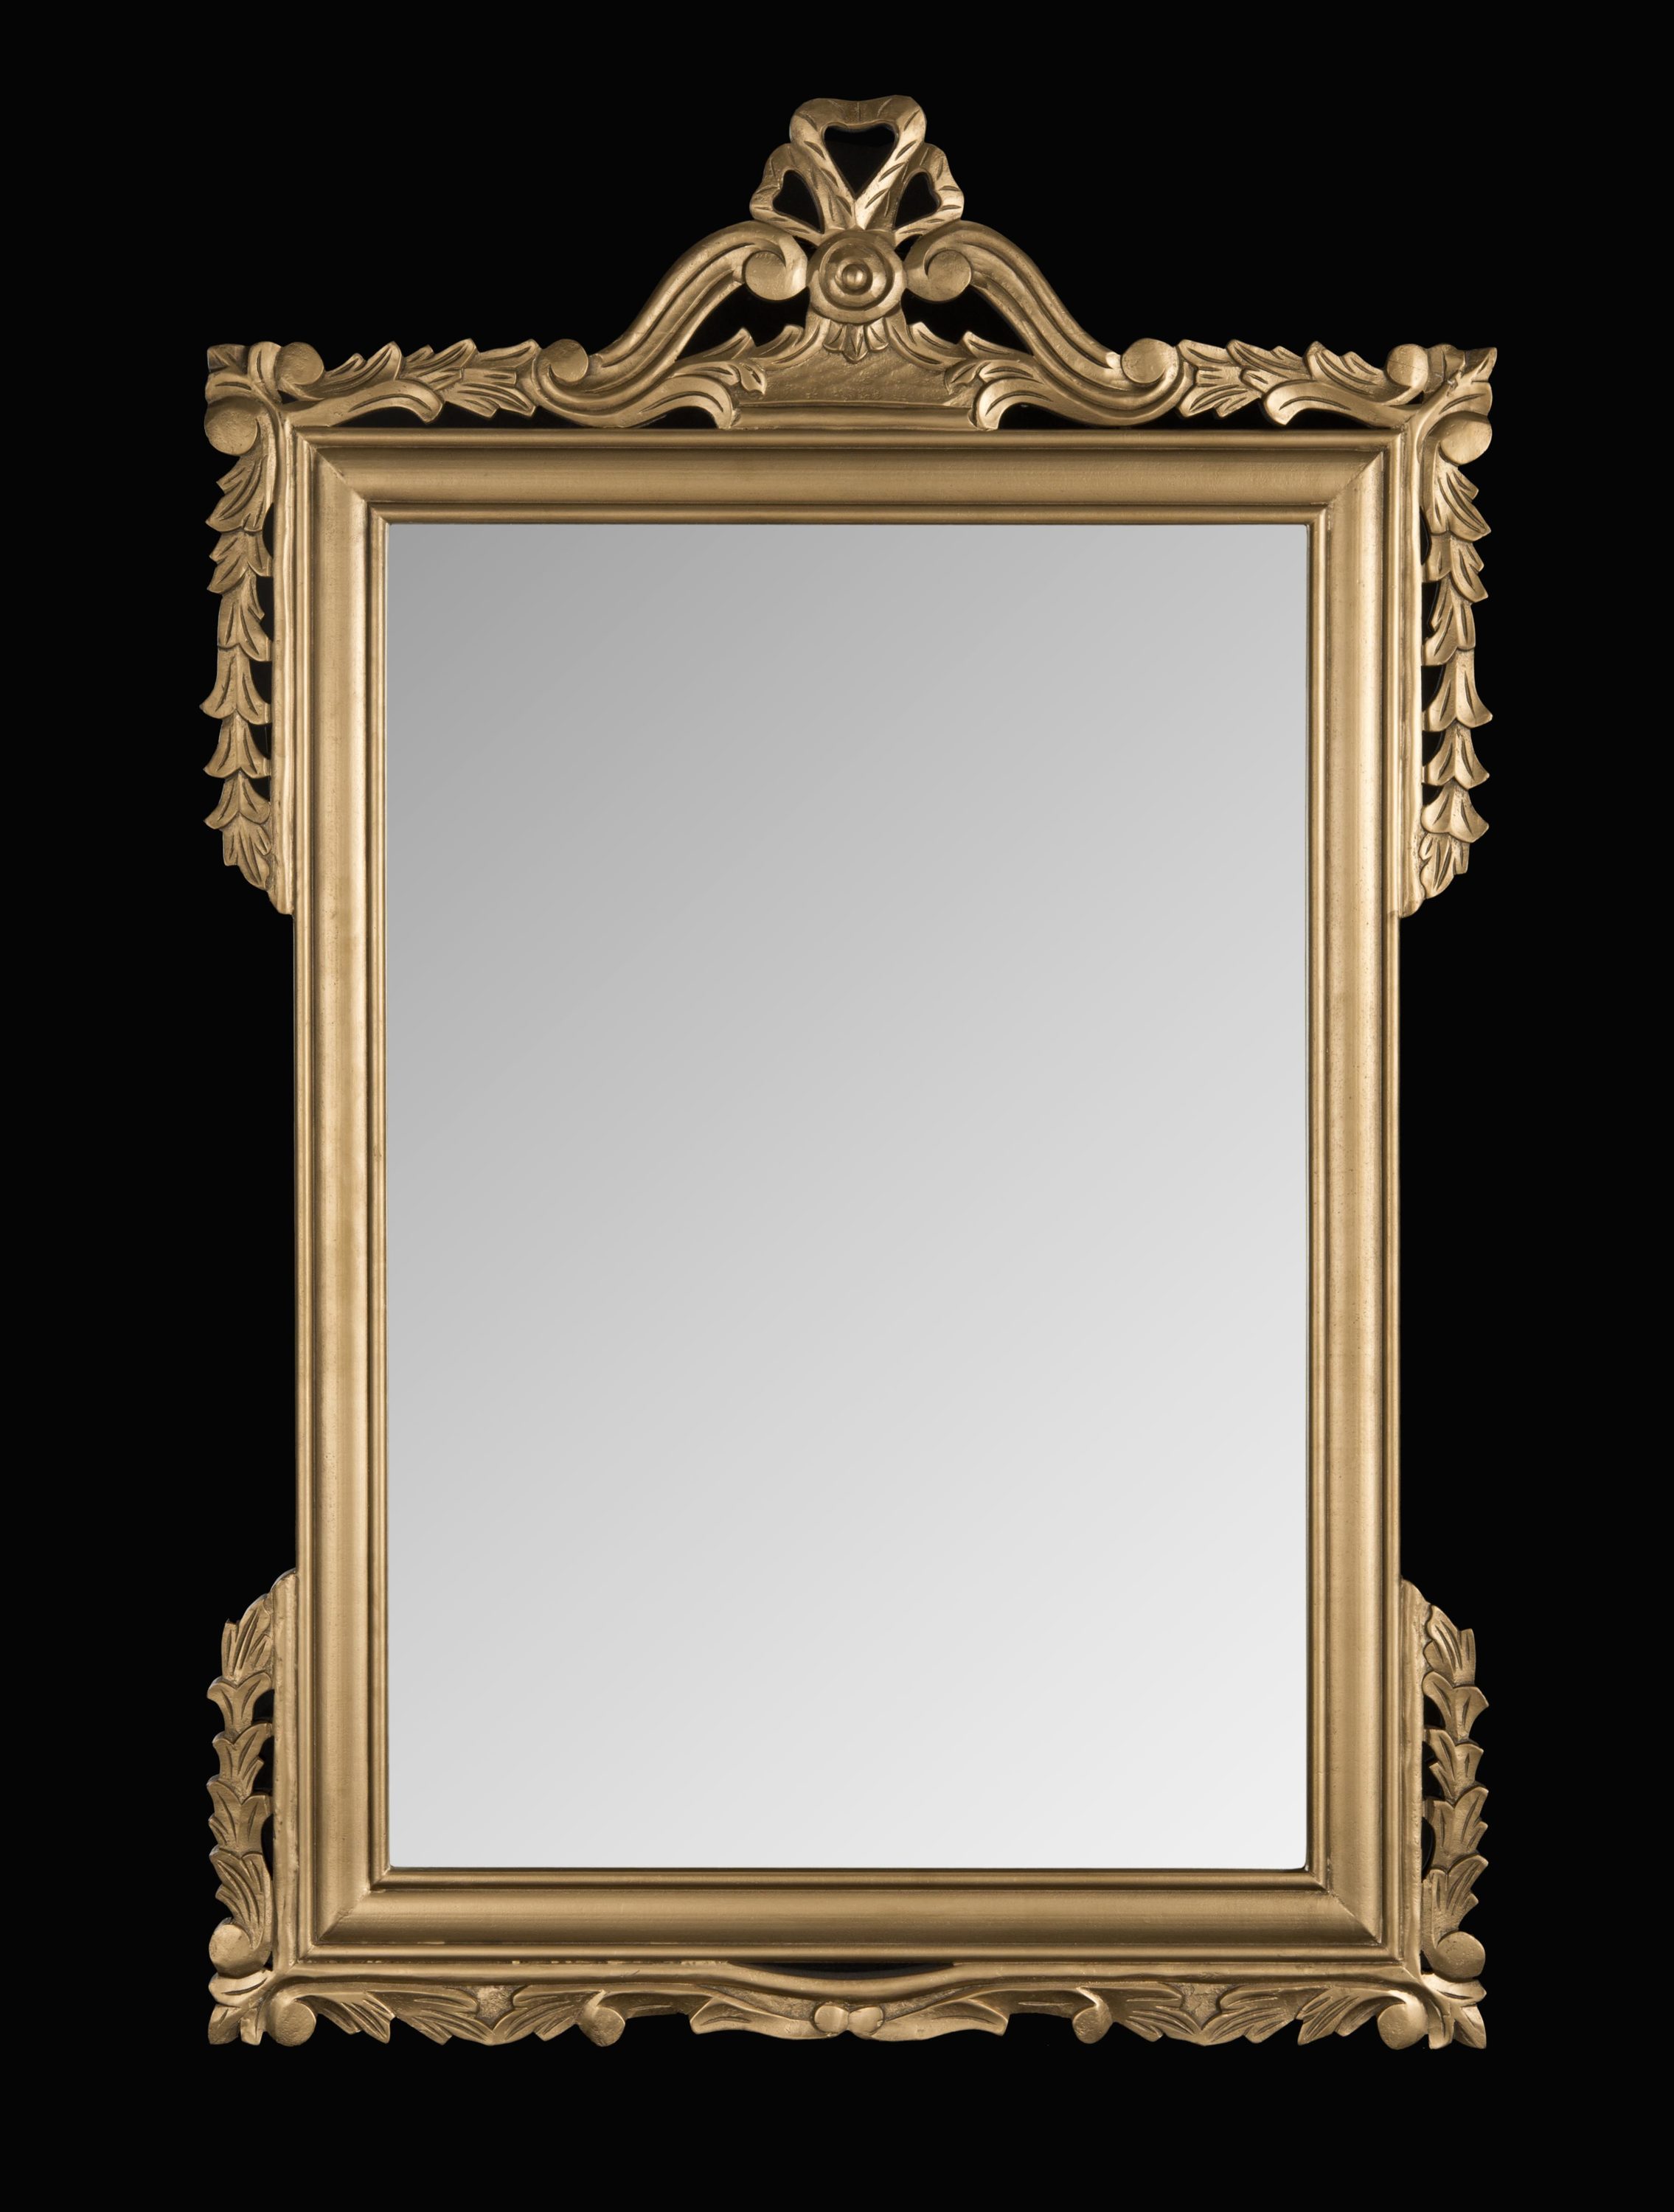 Safavieh Pedimint 31-in W x 47-in H Gold Framed Wall Mirror in the 